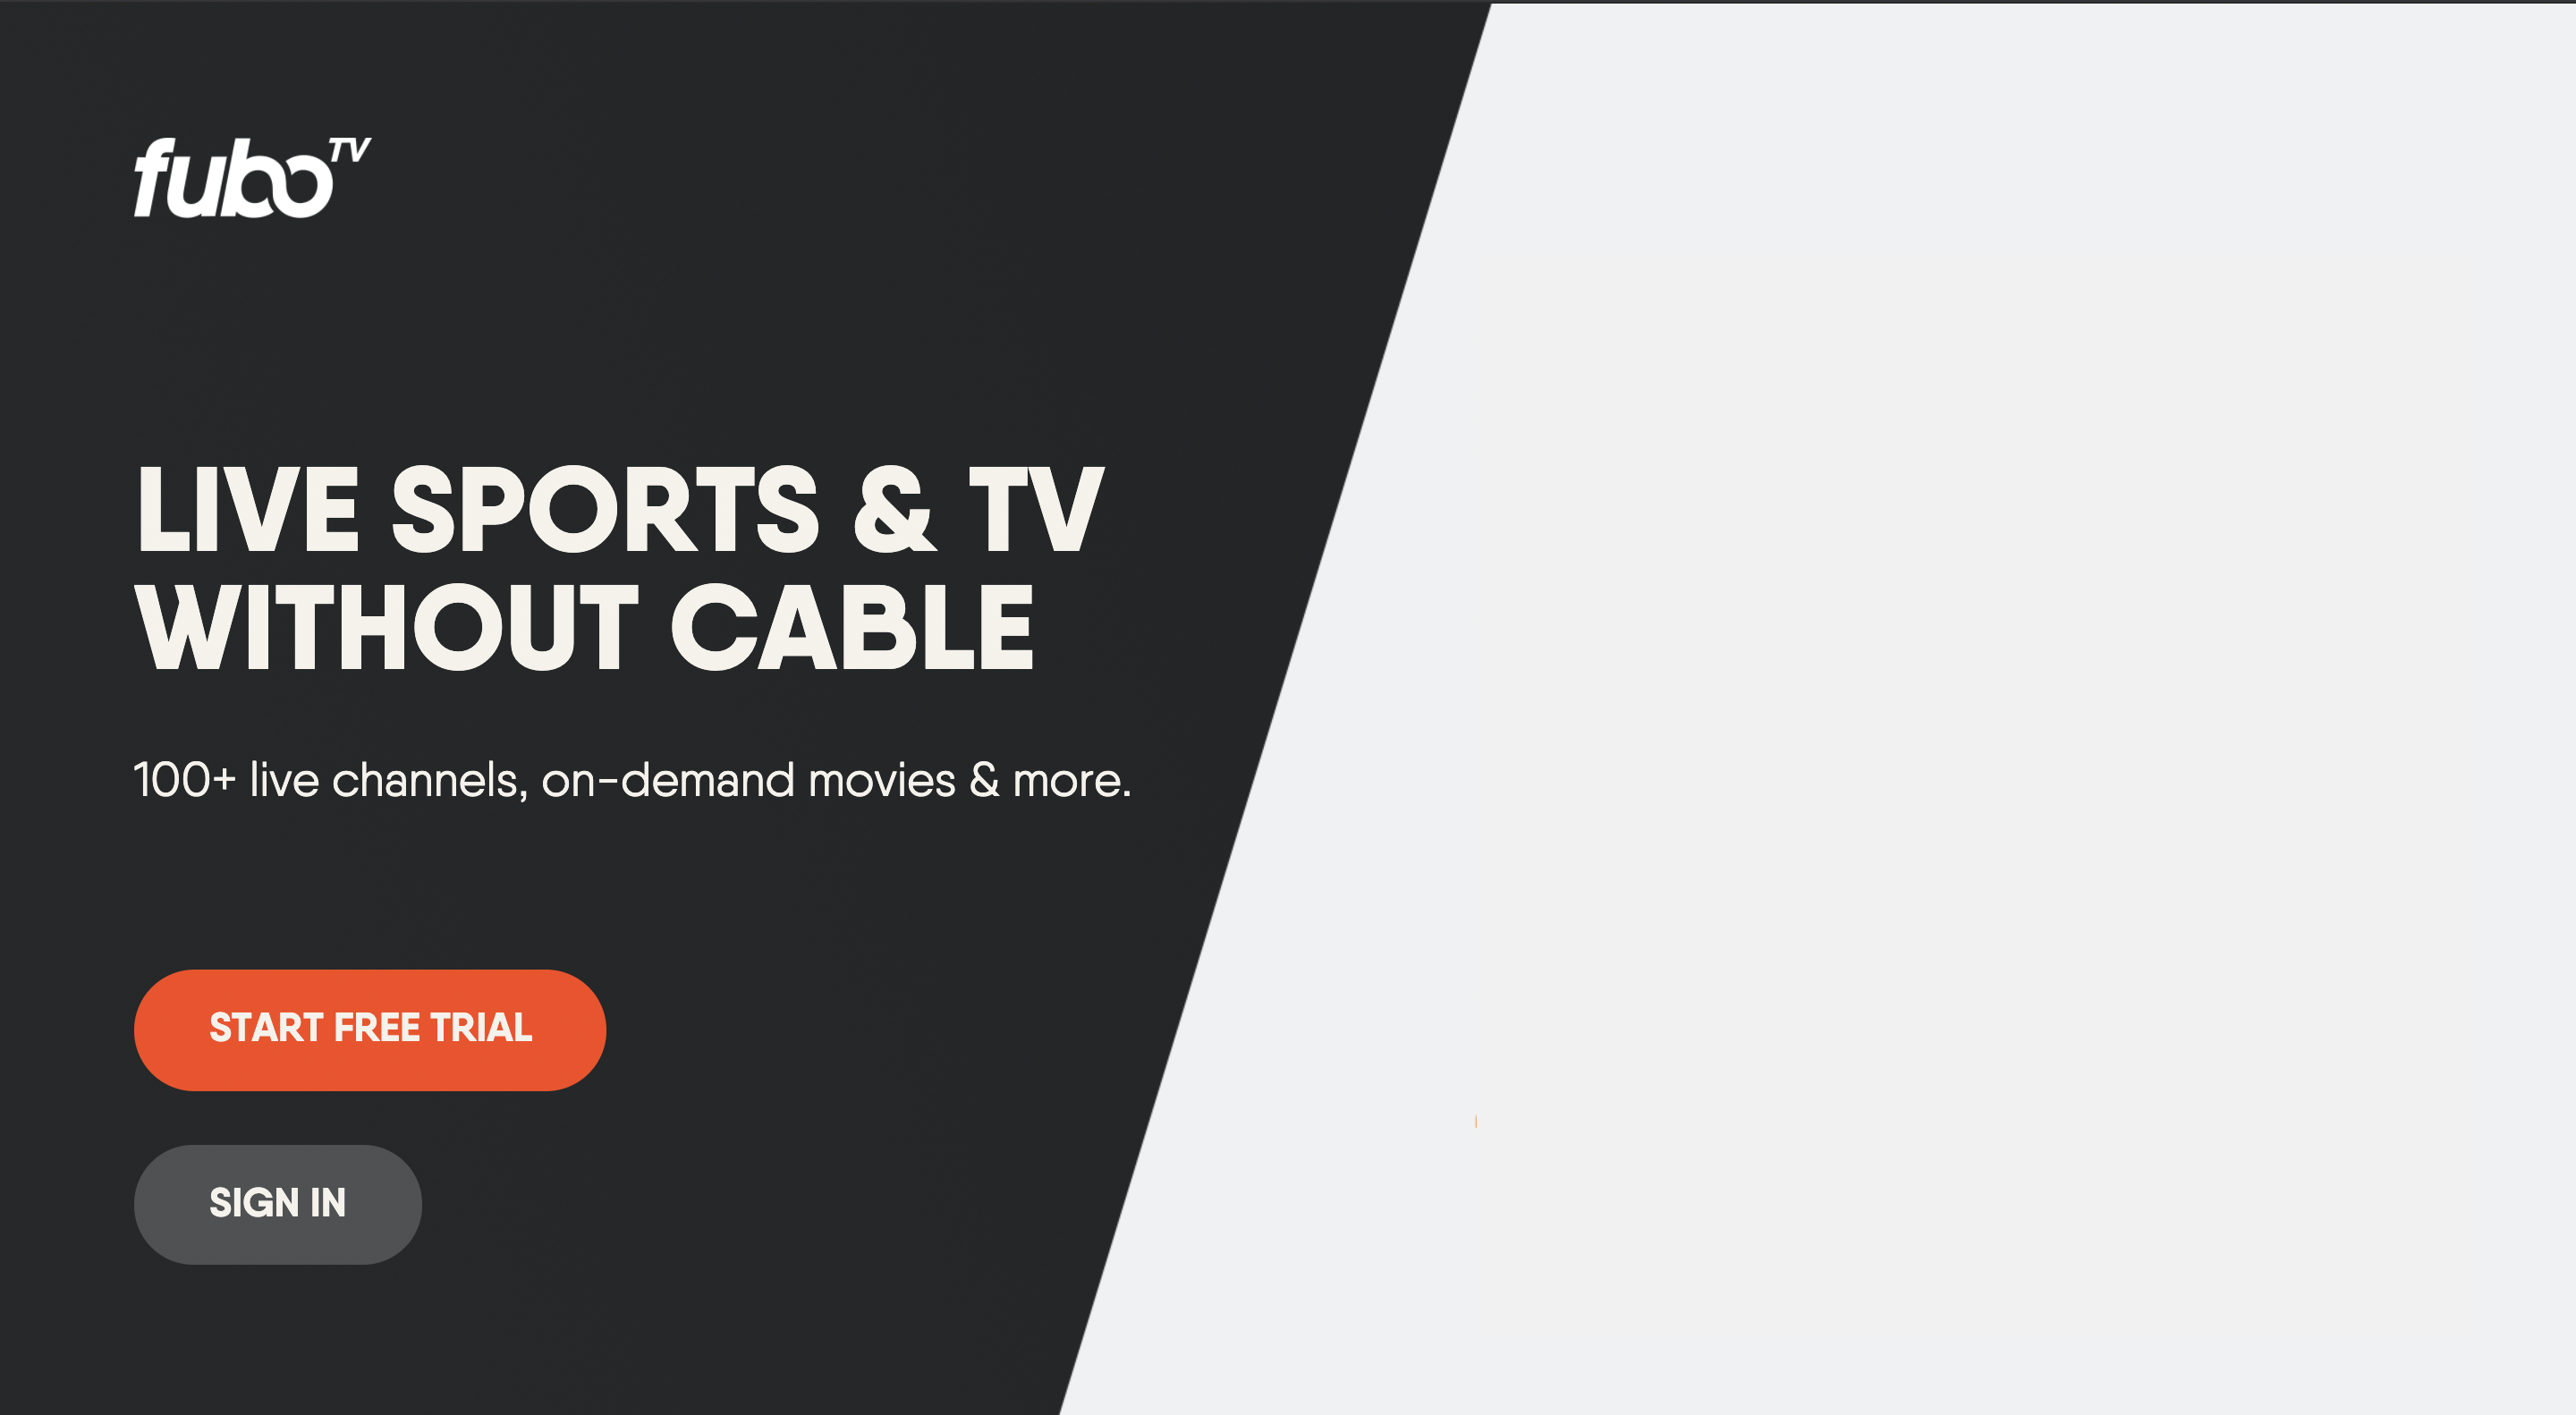 Main sign in screen for the FuboTV app on LG TV with options to sign in or get signup details